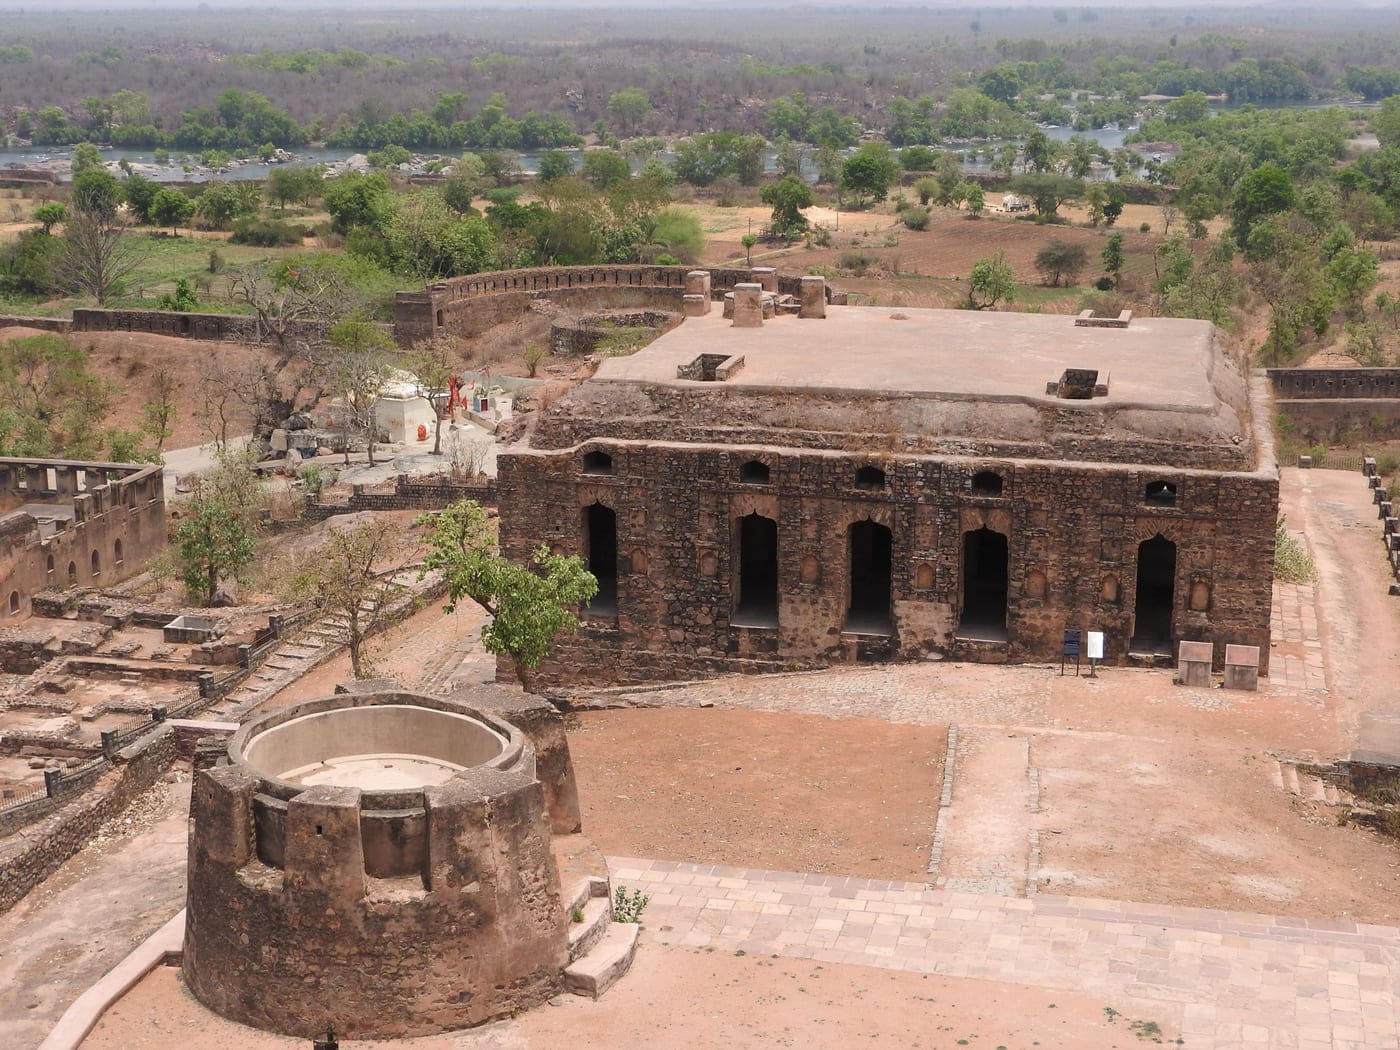 Unth Khana (Camel Stabel) as seen from Jehangir Mahal, Orchha 